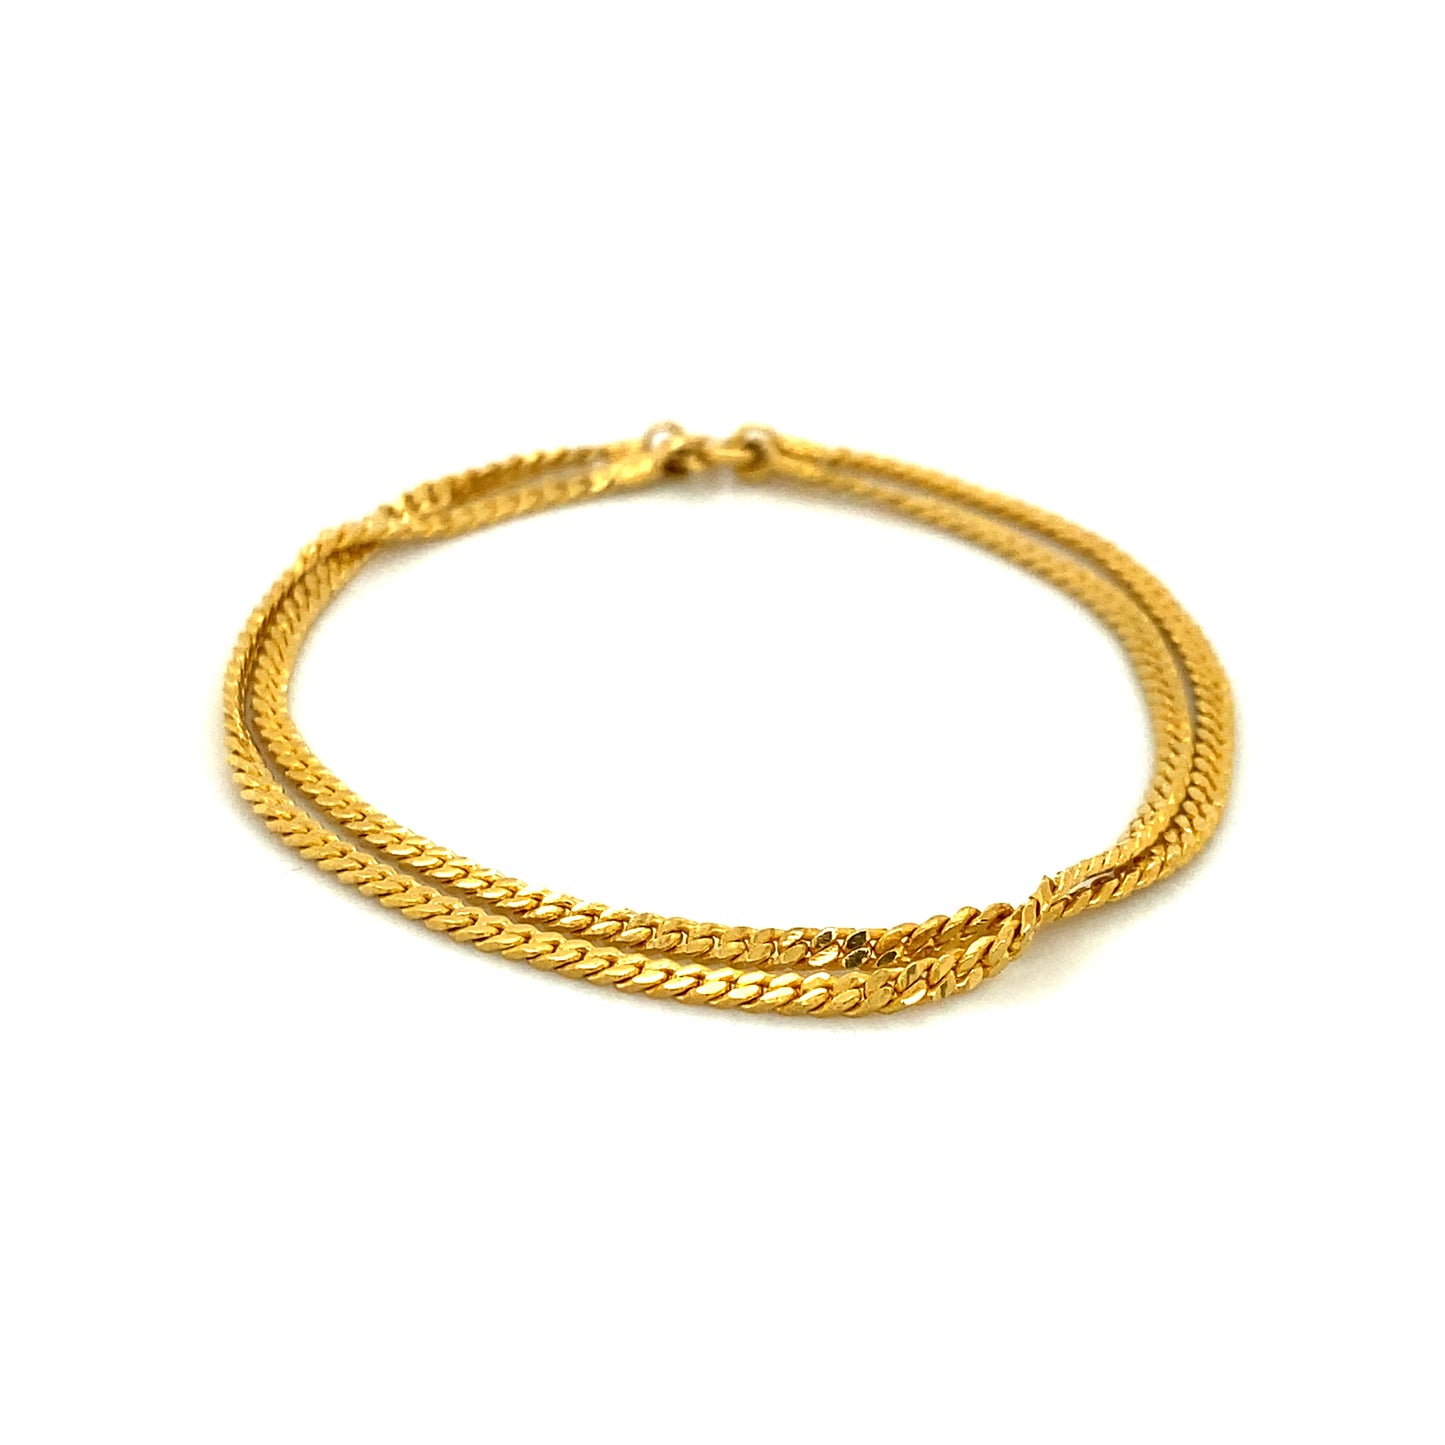 Double Curb Chain Bracelet in 22K Yellow Gold